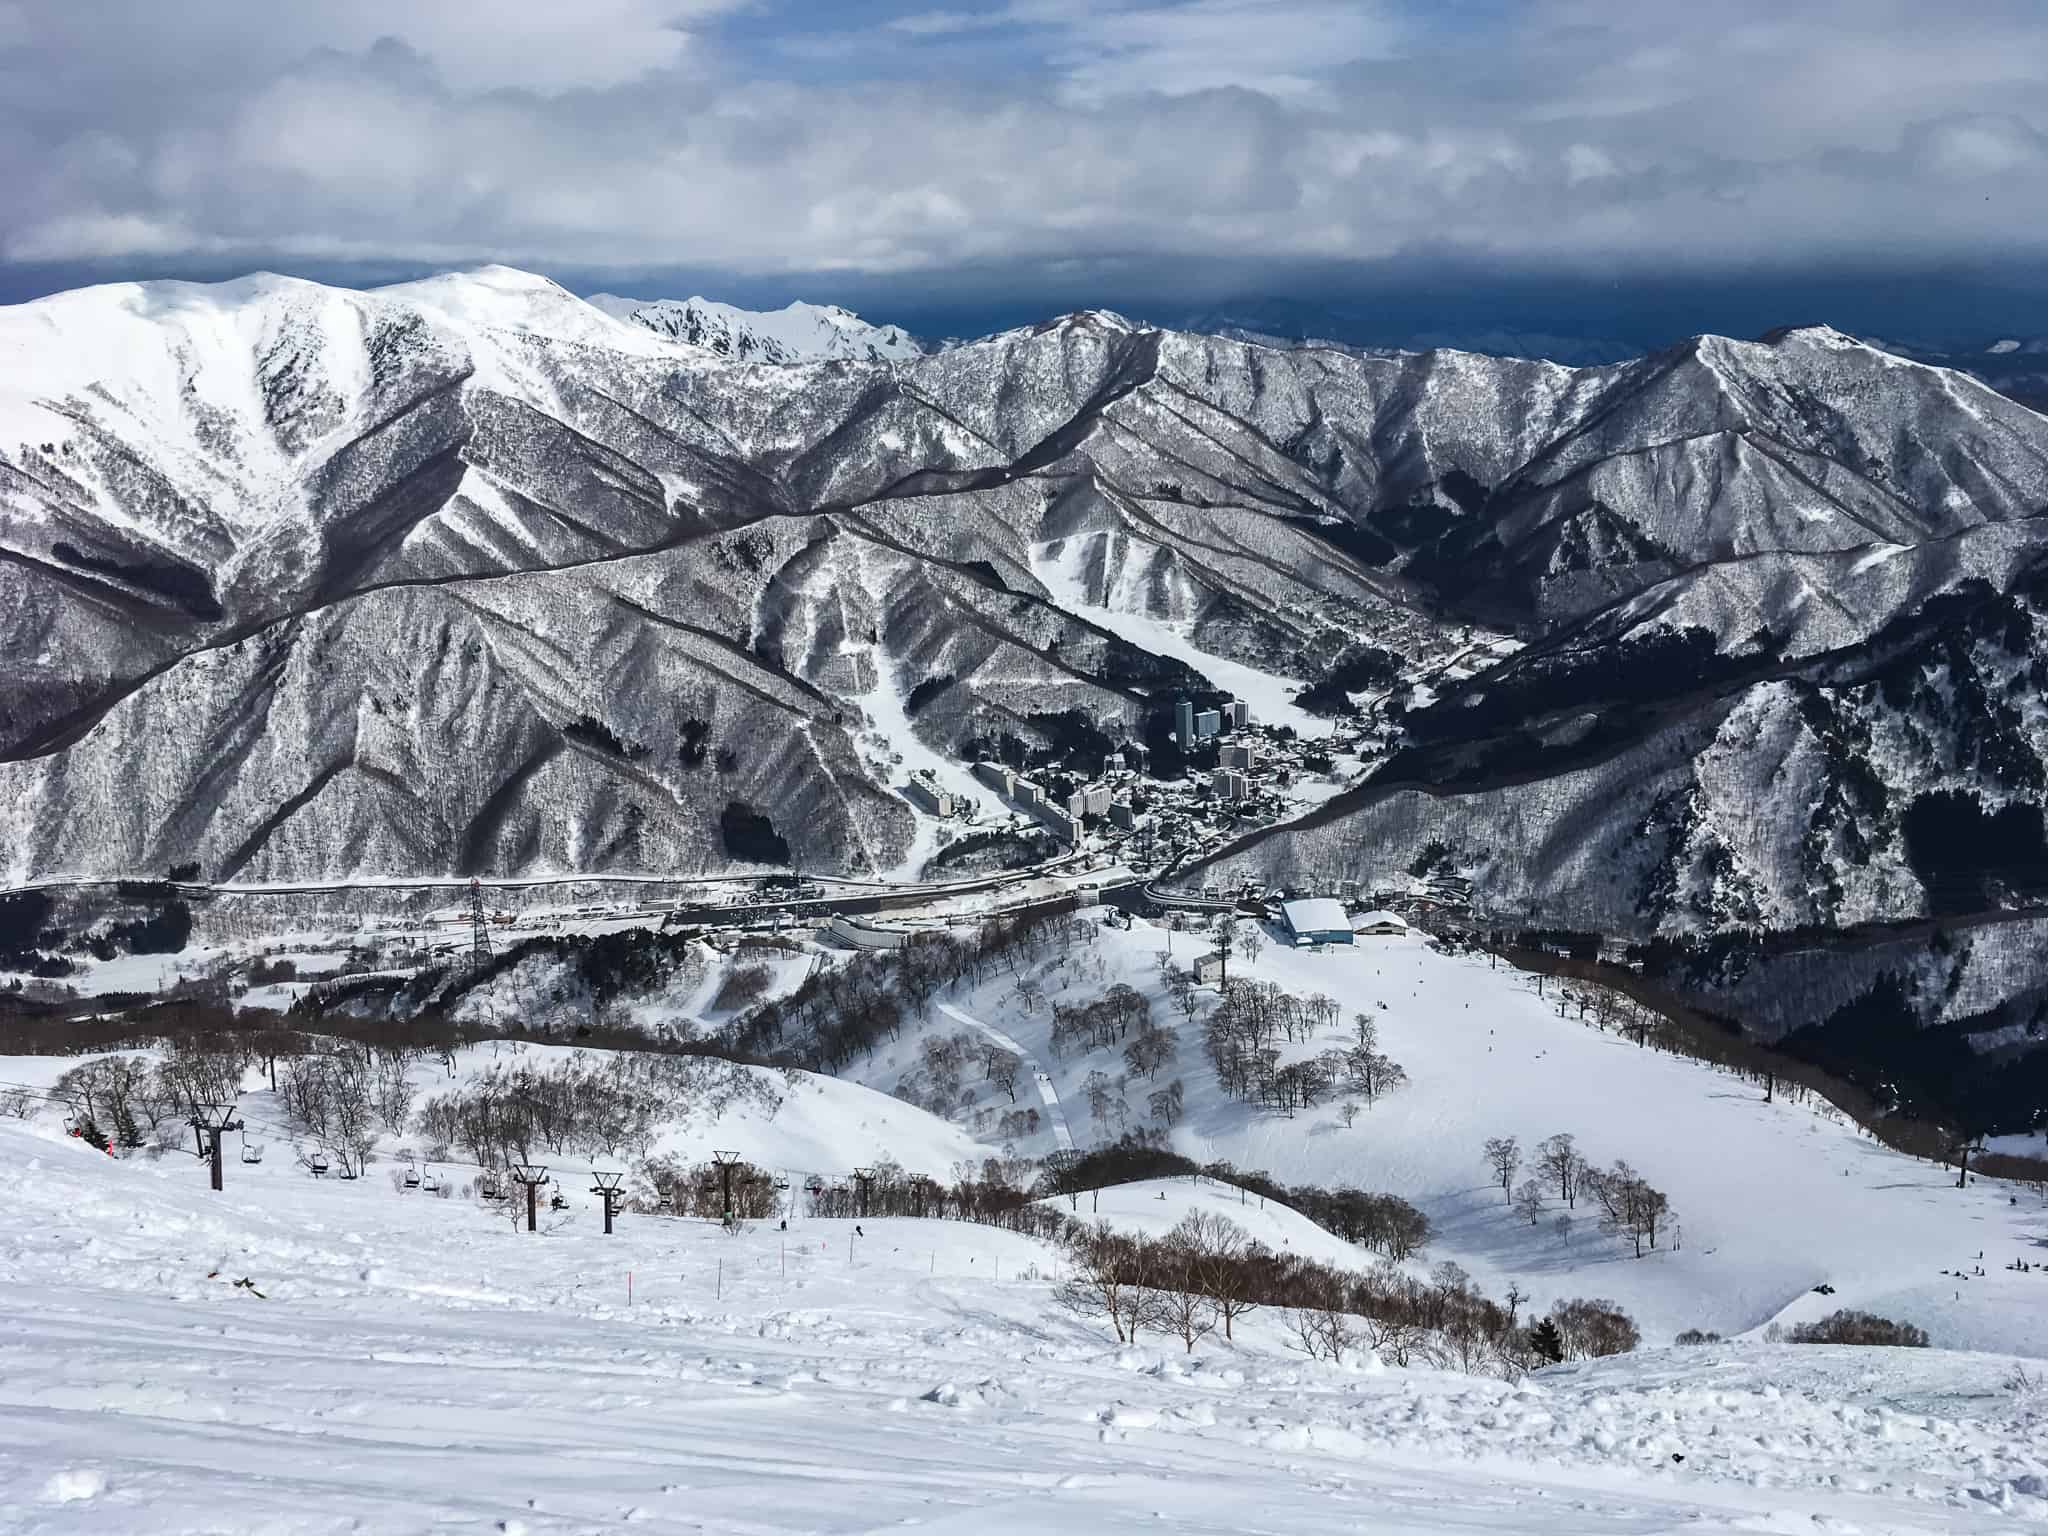 A great view from Naeba resort, Japan